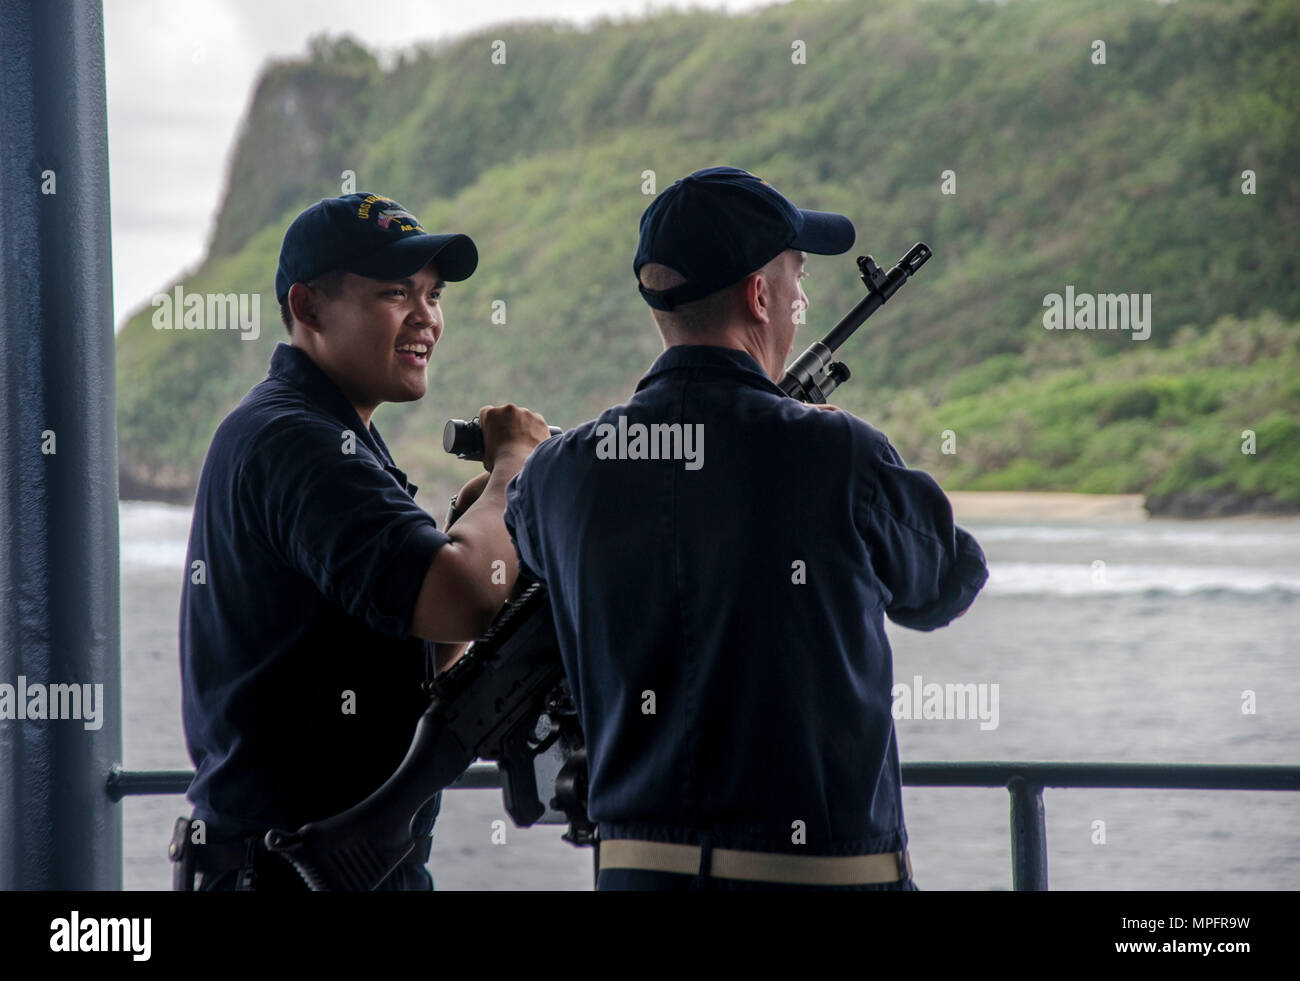 170307-N-DA434-085SANTA RITA, Guam (March 7, 2017) Gunner's Mate 2nd Class Kevin C. Barbo and Chief Machinist's Mate (Weapon) Shawn Quinton, assigned to the submarine tender USS Frank Cable (AS 40) Weapons Department, conduct force protection measures during sea and anchor, March 7.  Frank Cable, enroute to Portland, Ore. for her dry-dock phase maintenance availability, conducts maintenance and supports submarines and surface vessels deployed to the Indo-Asia-Pacific region. (U.S. Navy photo by Mass Communication Specialist 3rd Class Alana Langdon/Released) Stock Photo